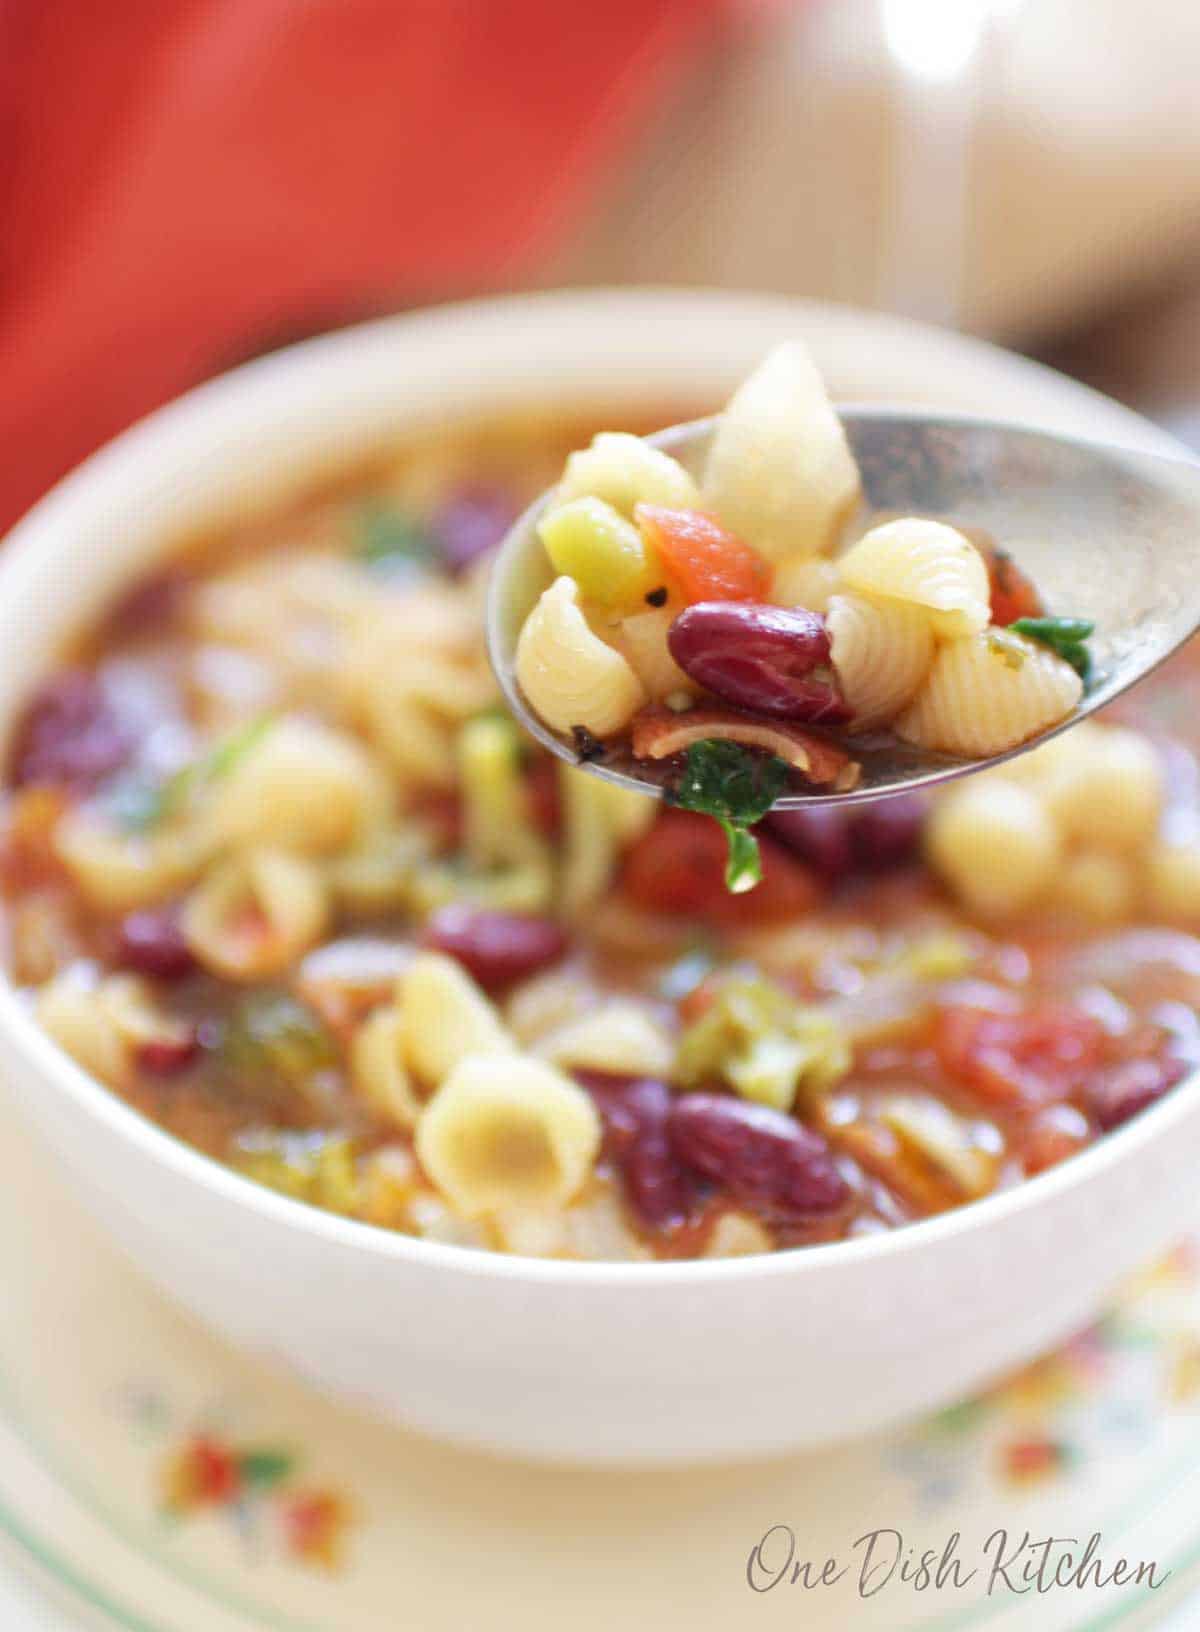 A spoonful of minestrone soup filled with noodles, beans, carrots, and other vegetables